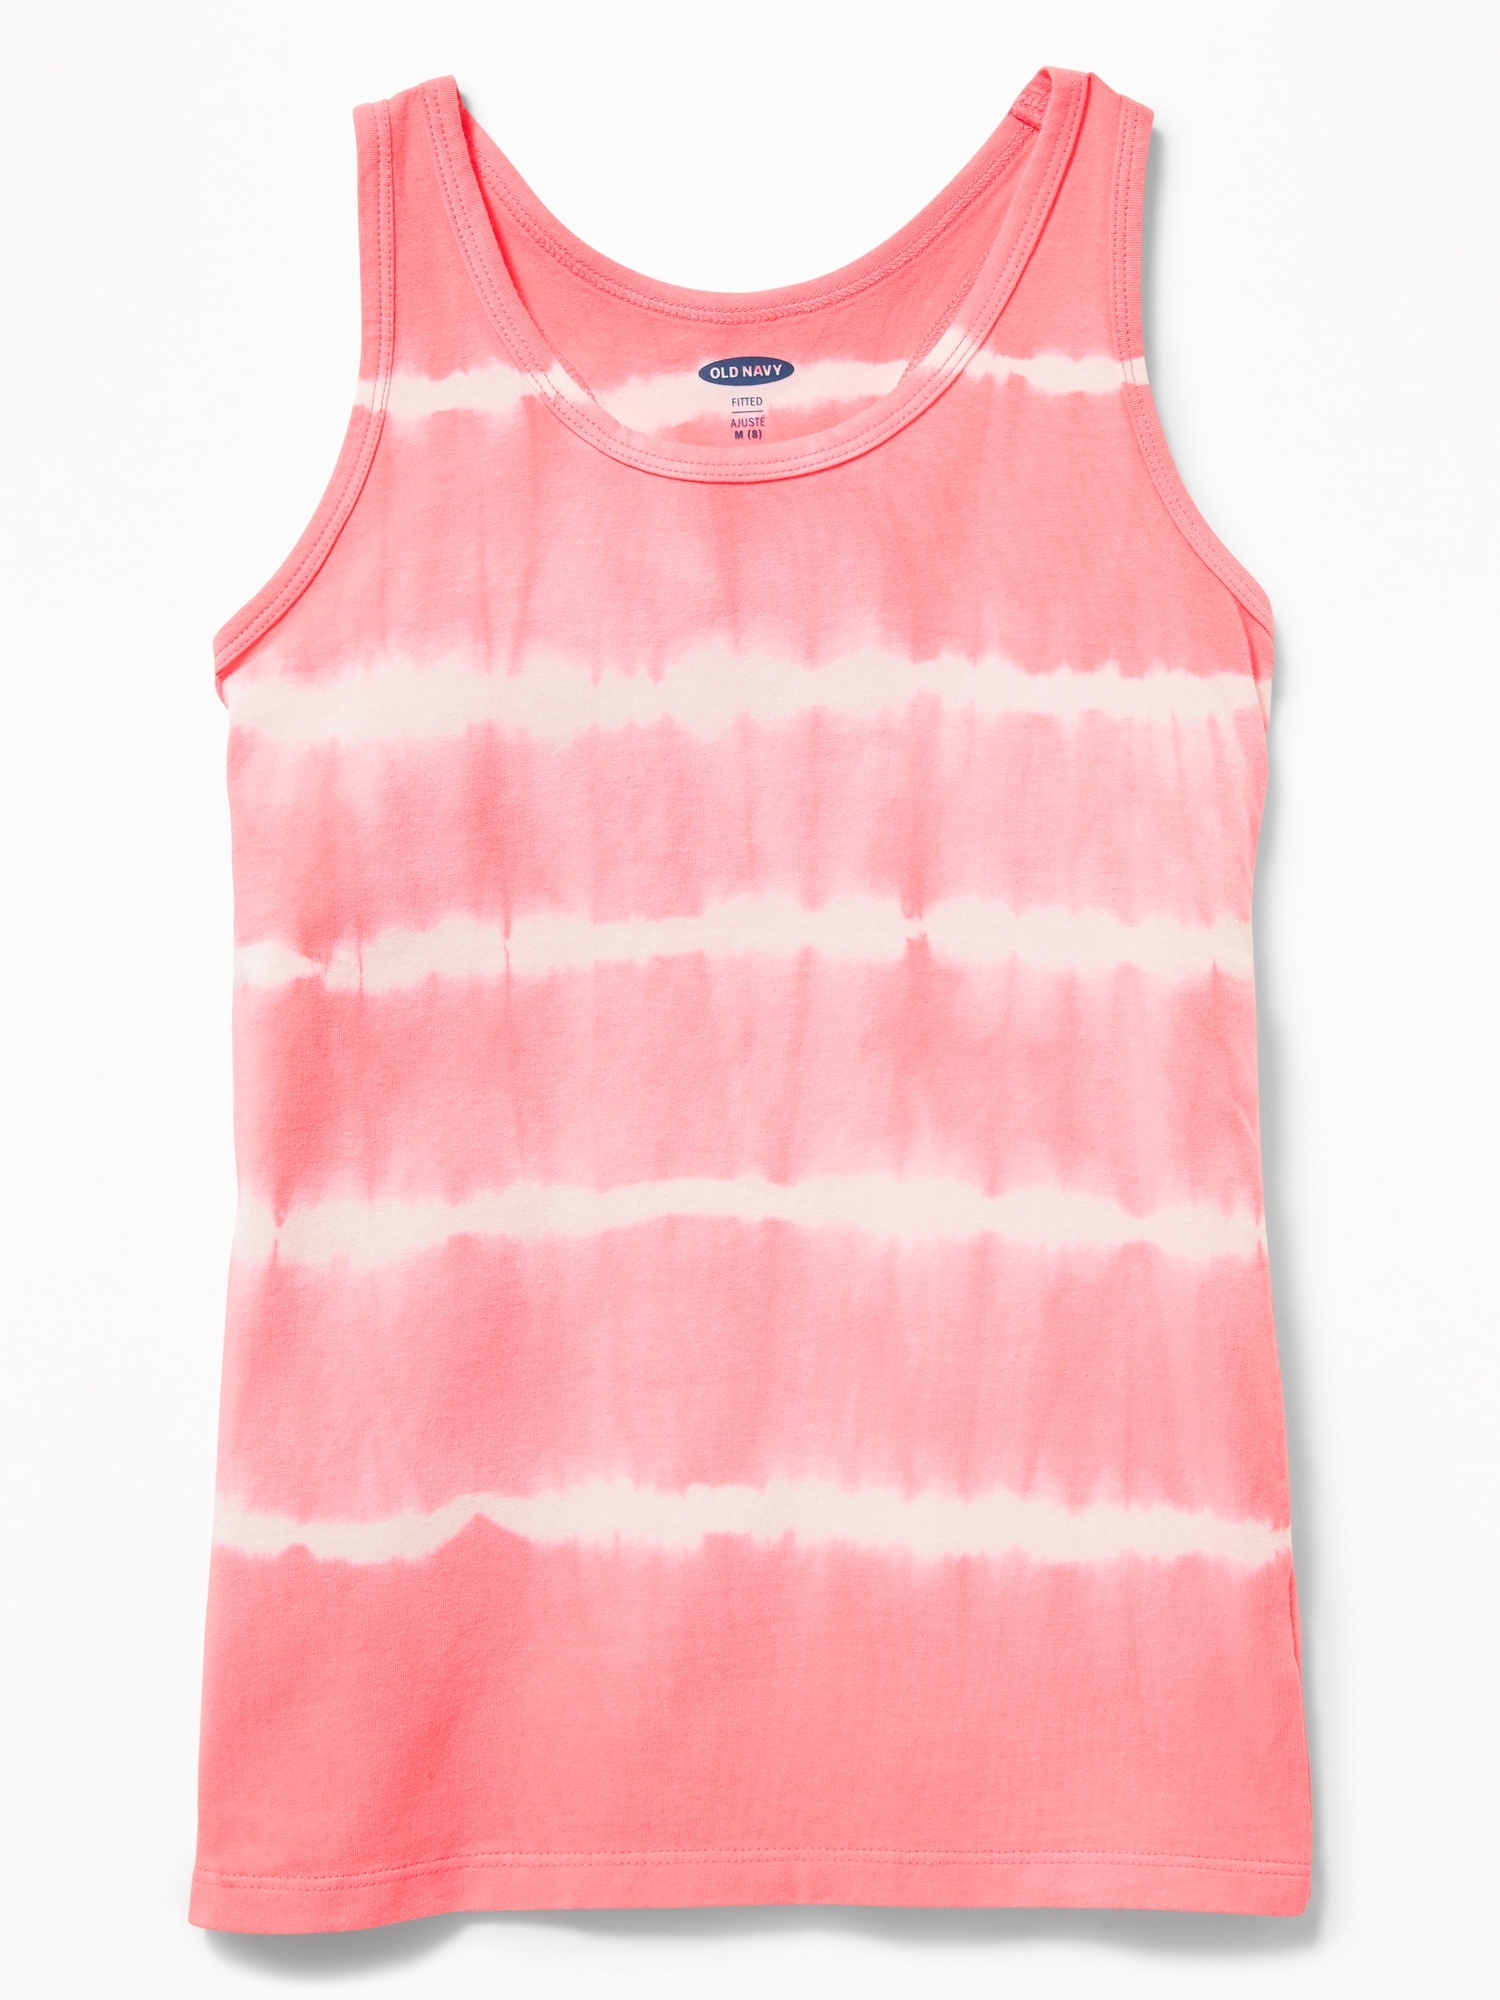 Fitted Racerback Tank for Girls | Old Navy